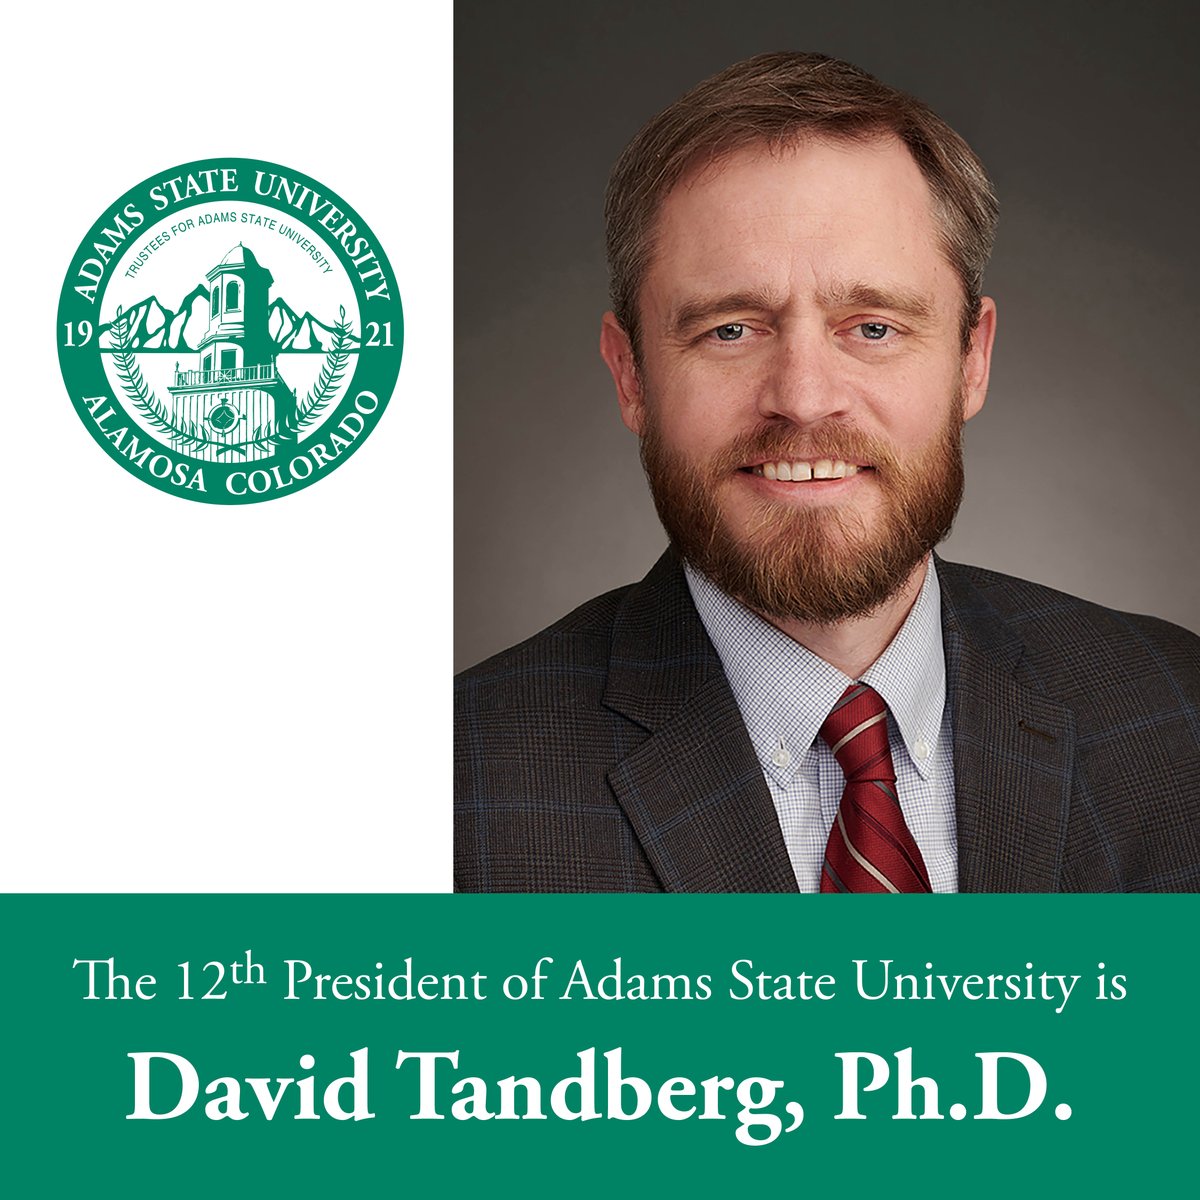 On April 21, David A. Tandberg, Ph.D., was selected by unanimous vote of the Adams State University Board of Trustees as the twelfth president, to take effect after finalizing contract terms, already agreed to in principle with all finalists. adams.edu/news/tandberg-…